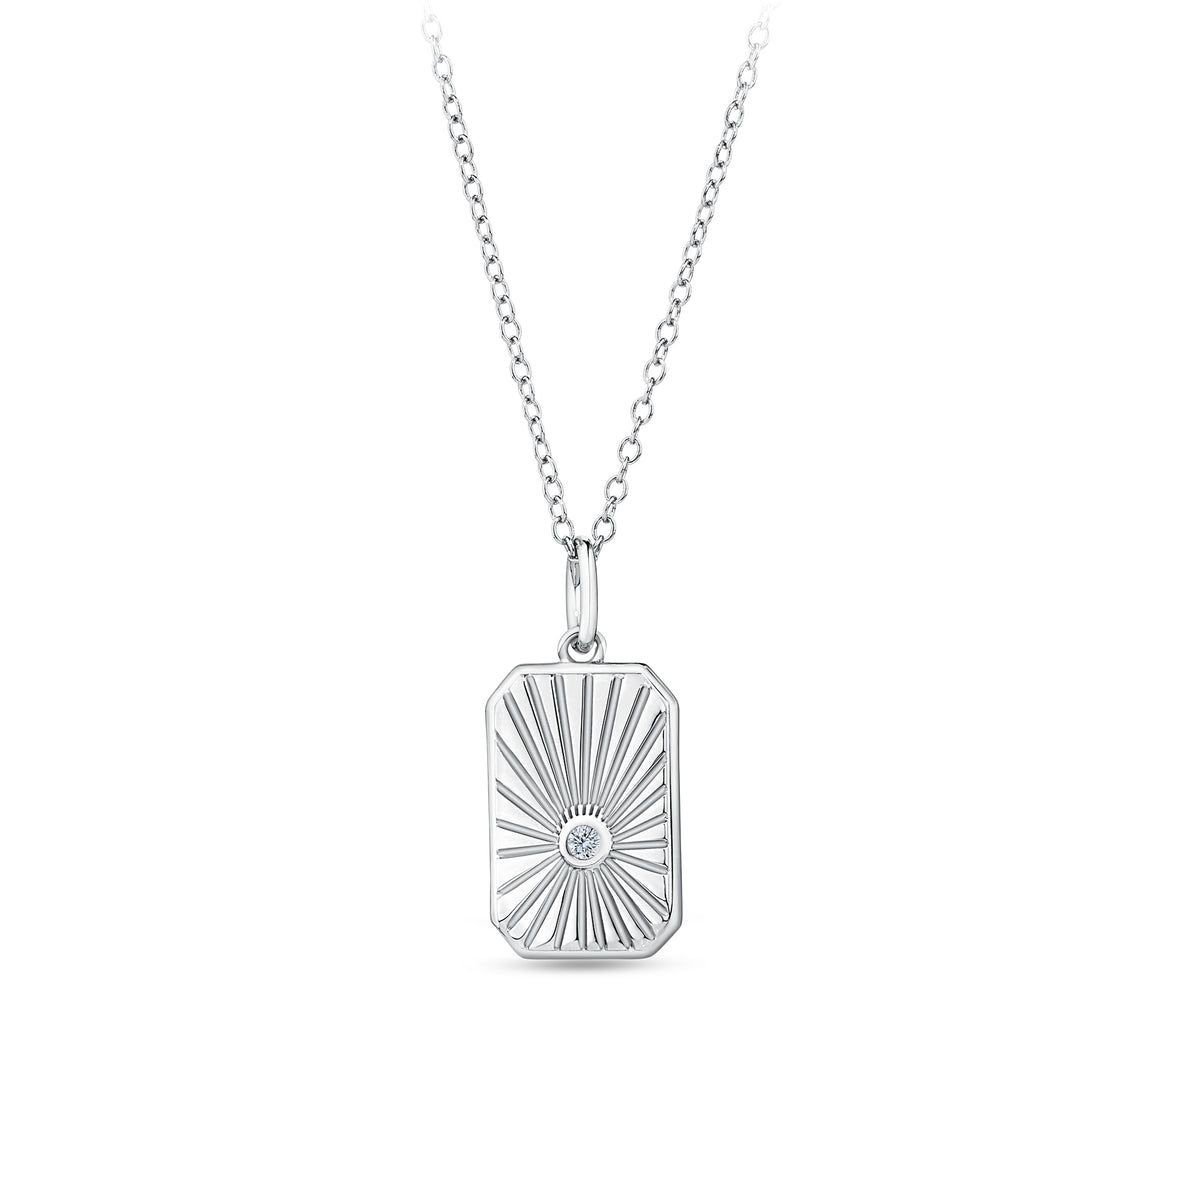 Rectangular Cubic Zirconia Pendant in Sterling Silver